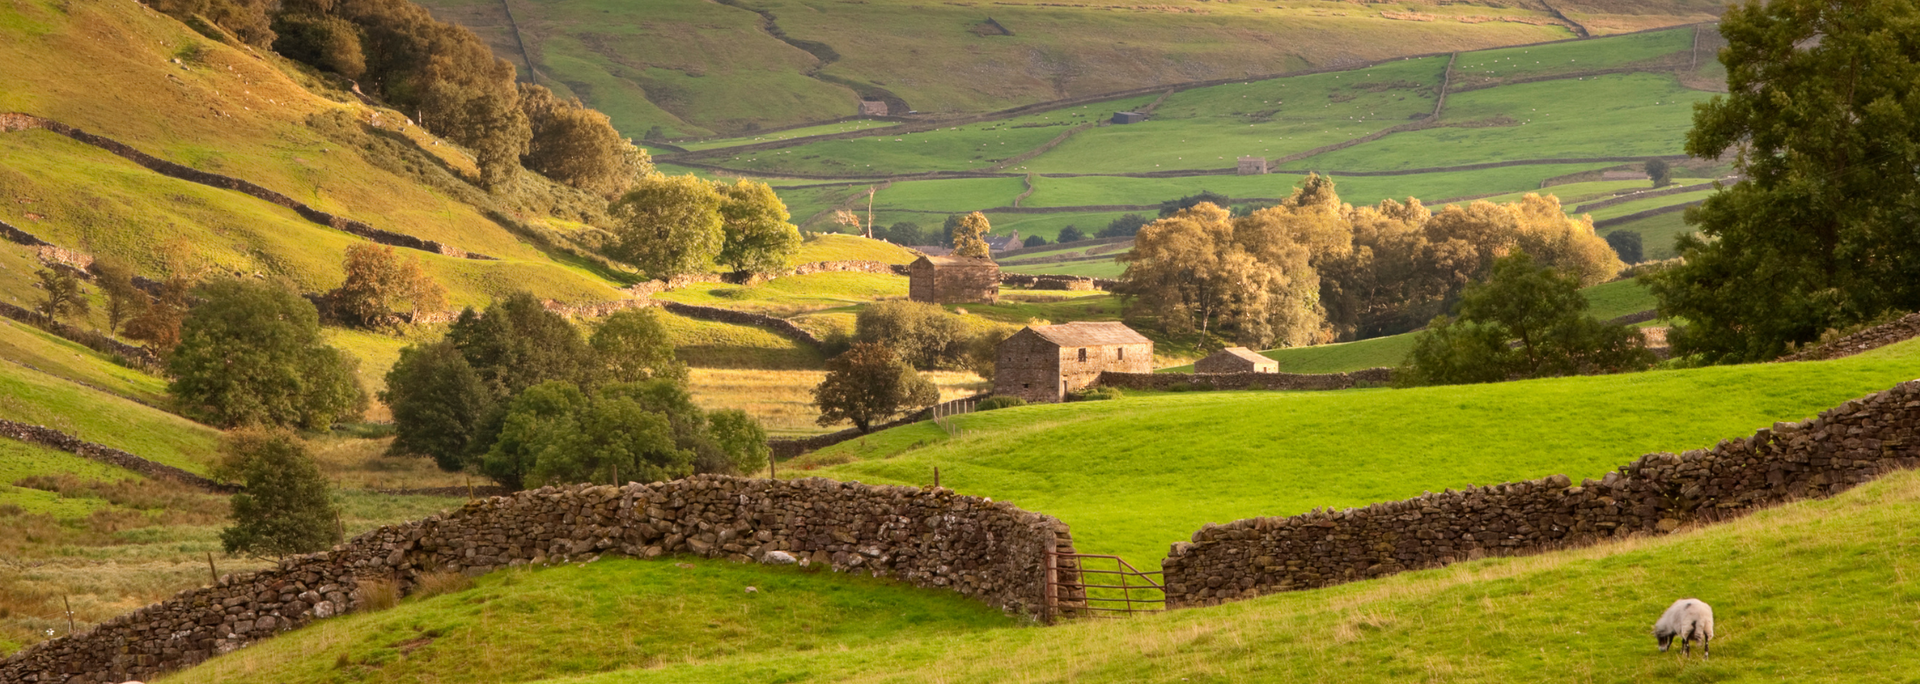 Picture of the Yorkshire Dales.
